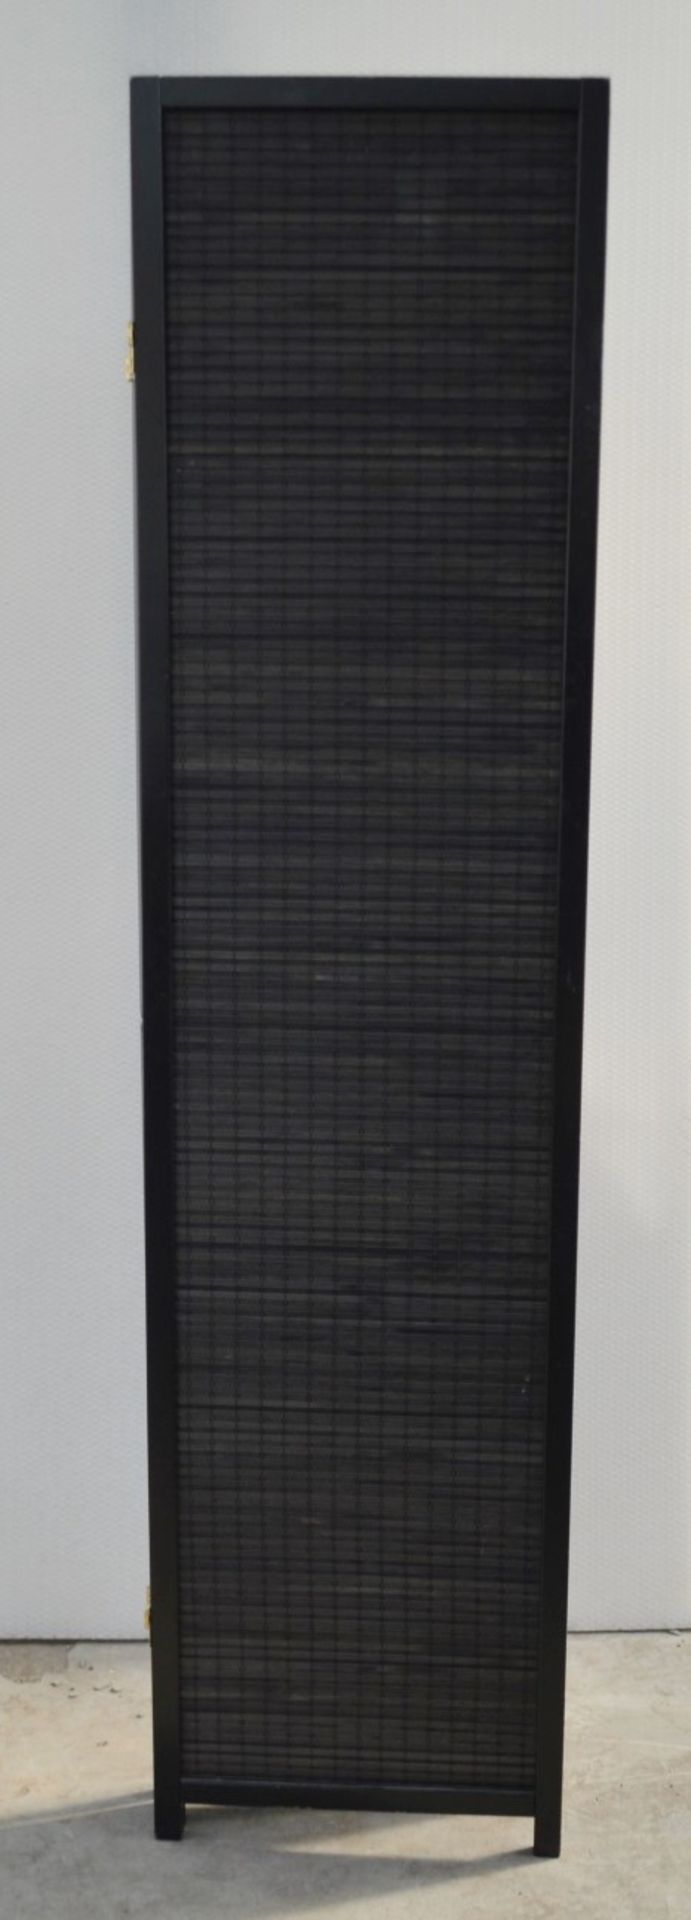 1 x 4-Panel Dressing Screen In Black - Dimensions: Height 180 x Max.Width 180cm - Ref: MHB100 - - Image 2 of 4